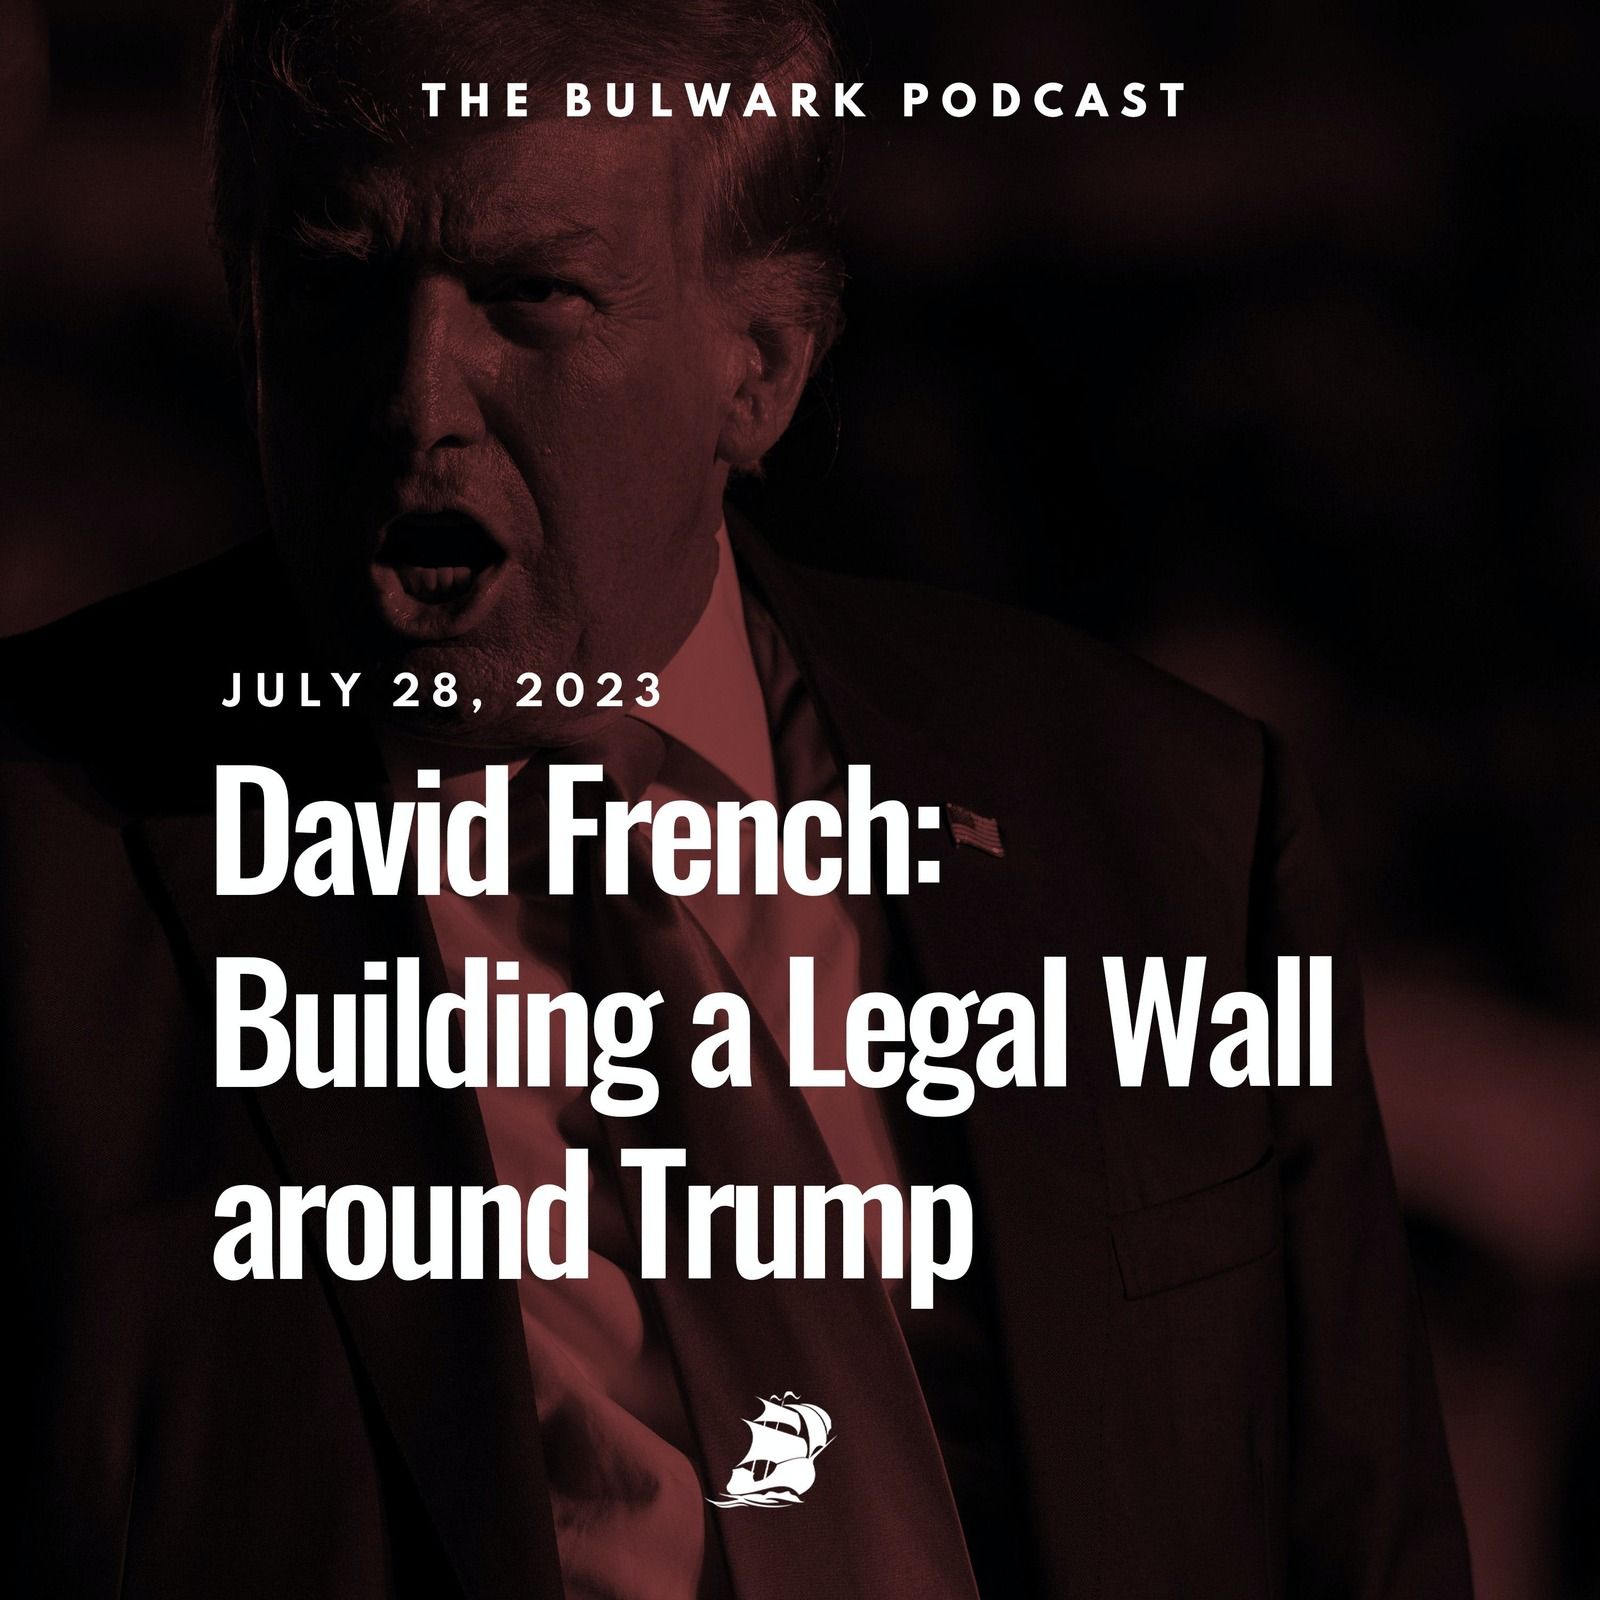 David French: Building a Legal Wall around Trump by The Bulwark Podcast